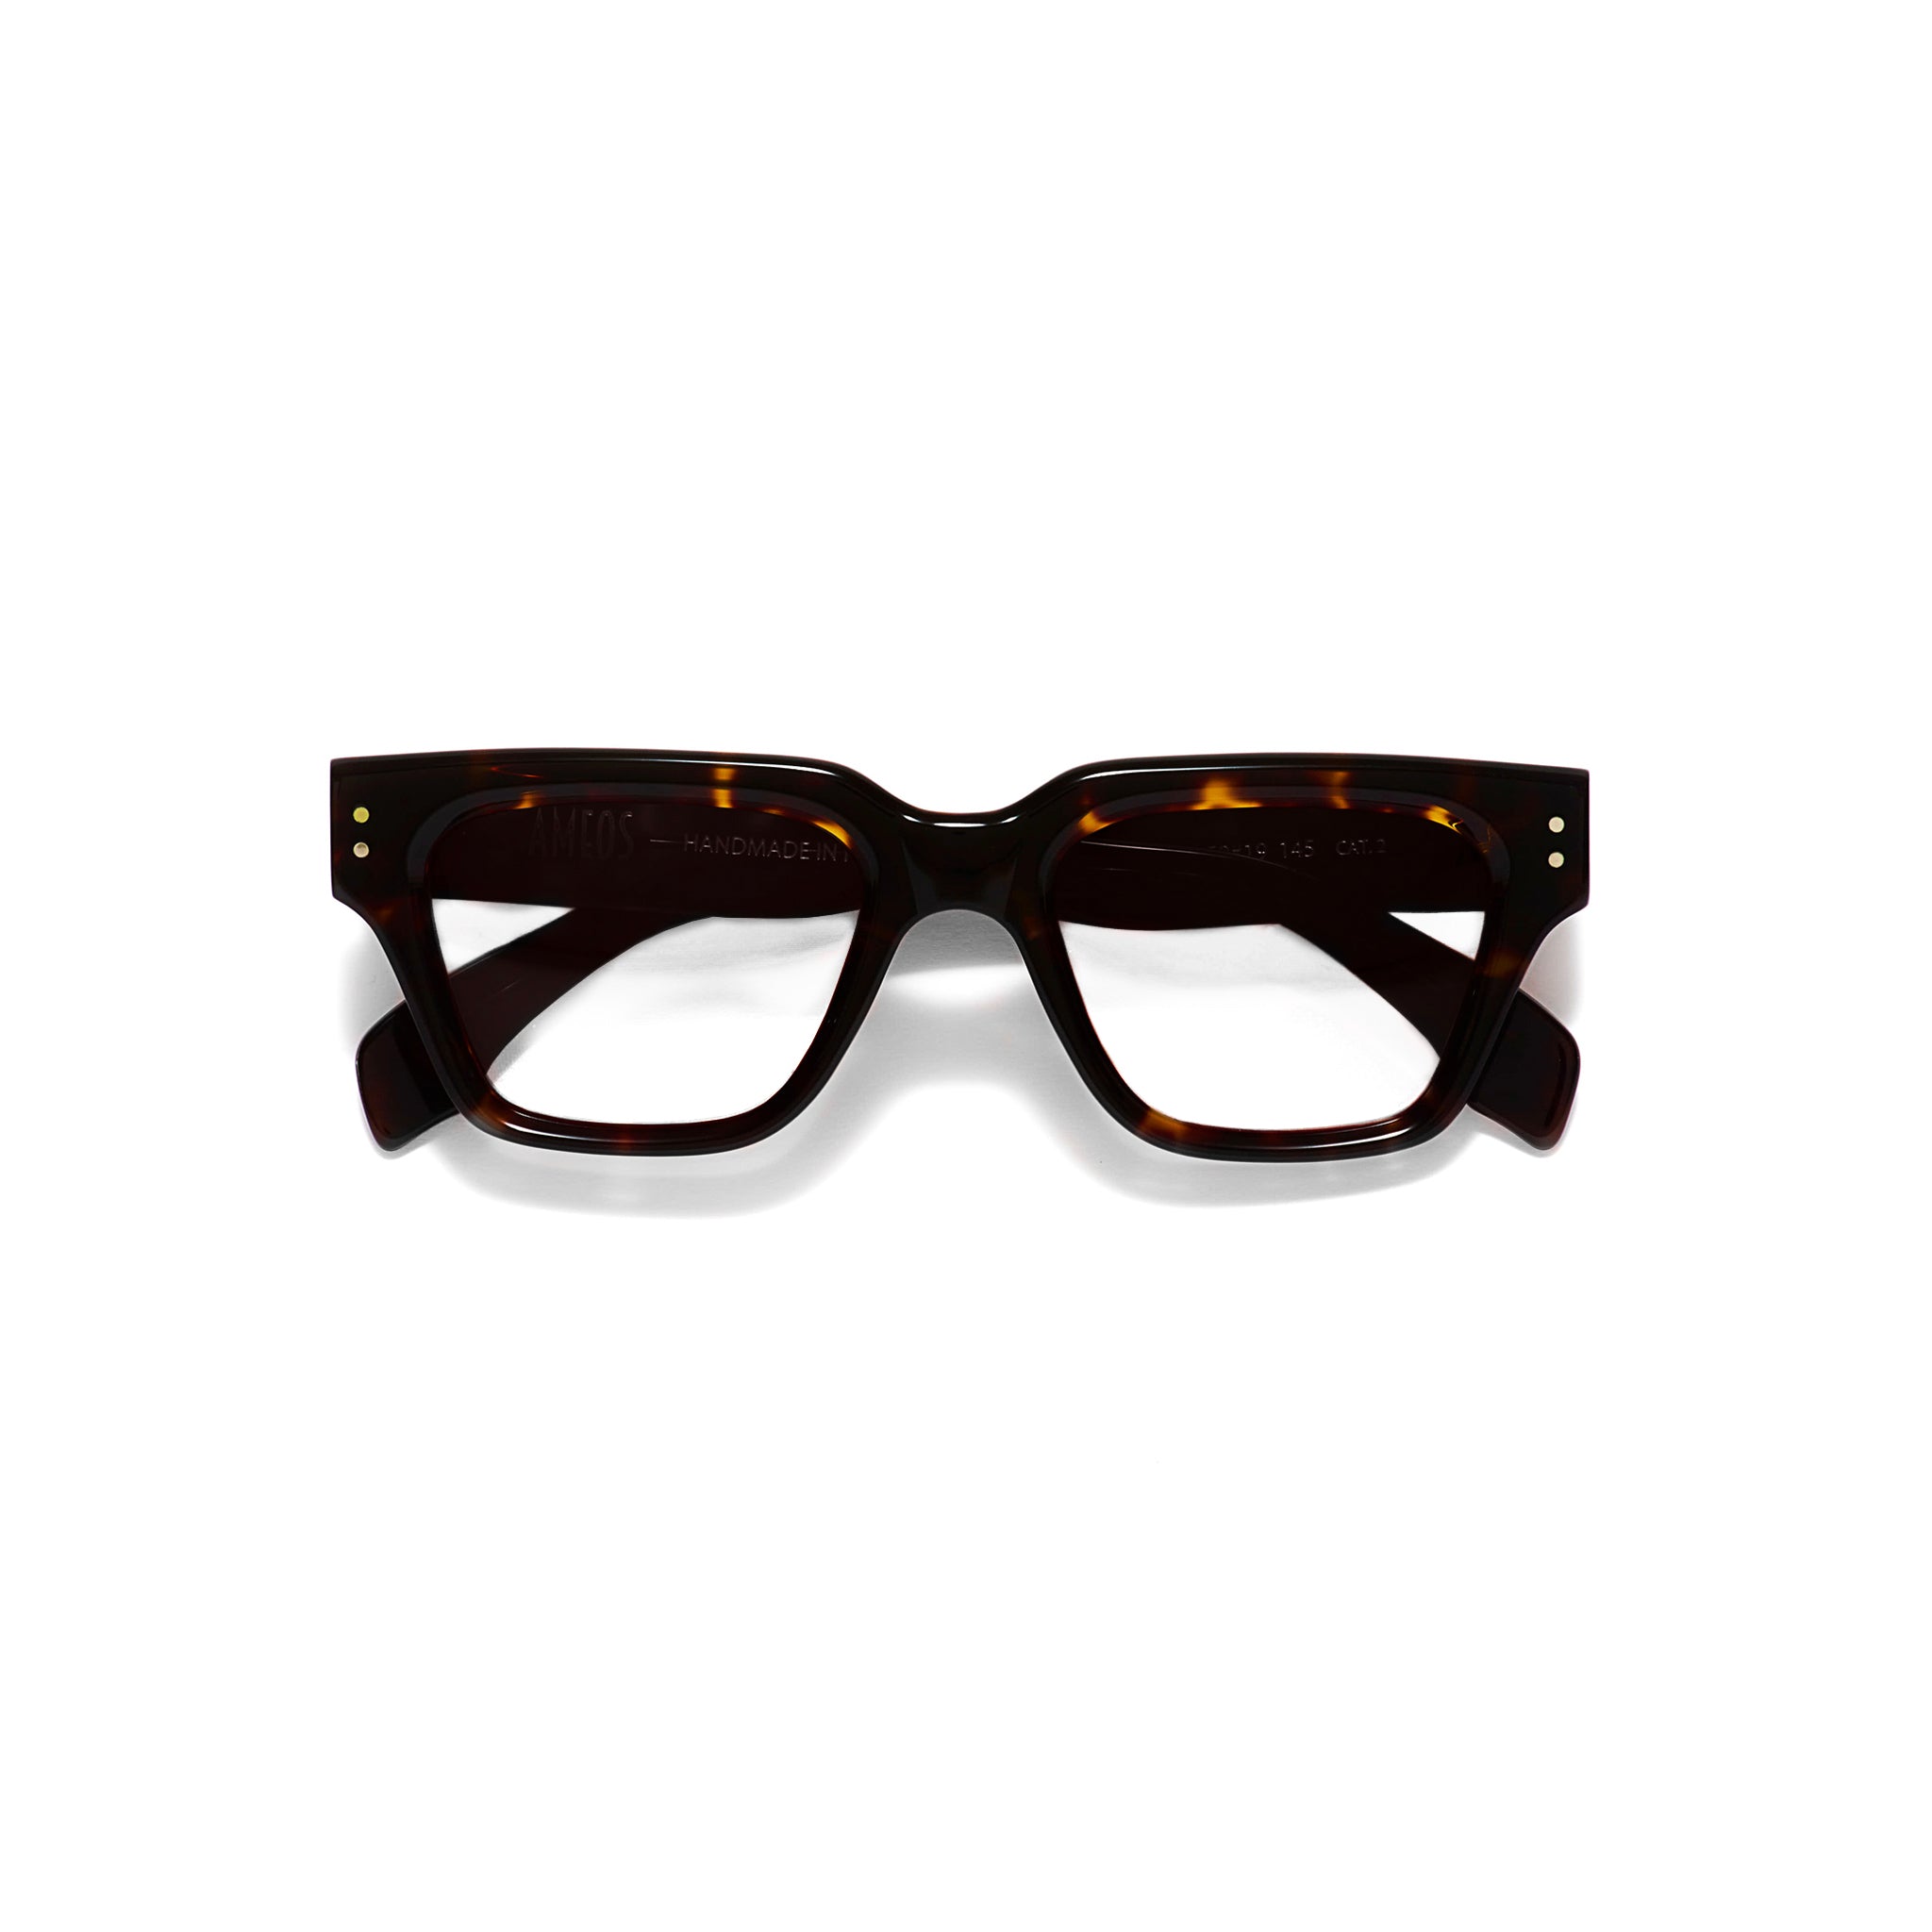 Ameos eyewear optical glasses robyn in tortoise frames. Unisex and handmade in Italy.